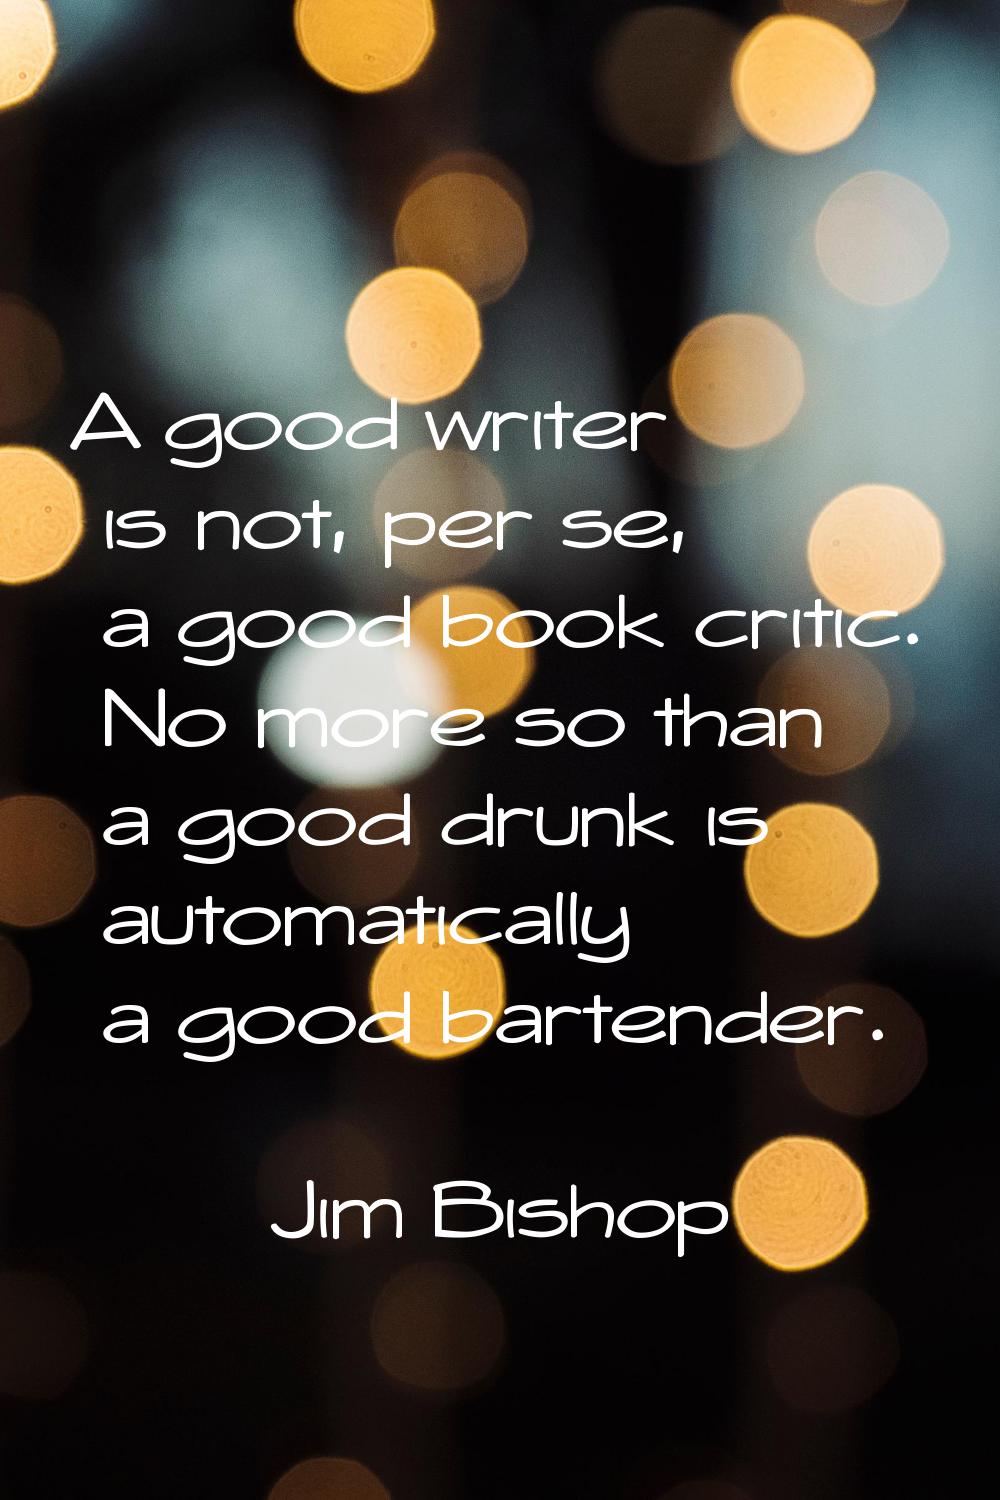 A good writer is not, per se, a good book critic. No more so than a good drunk is automatically a g